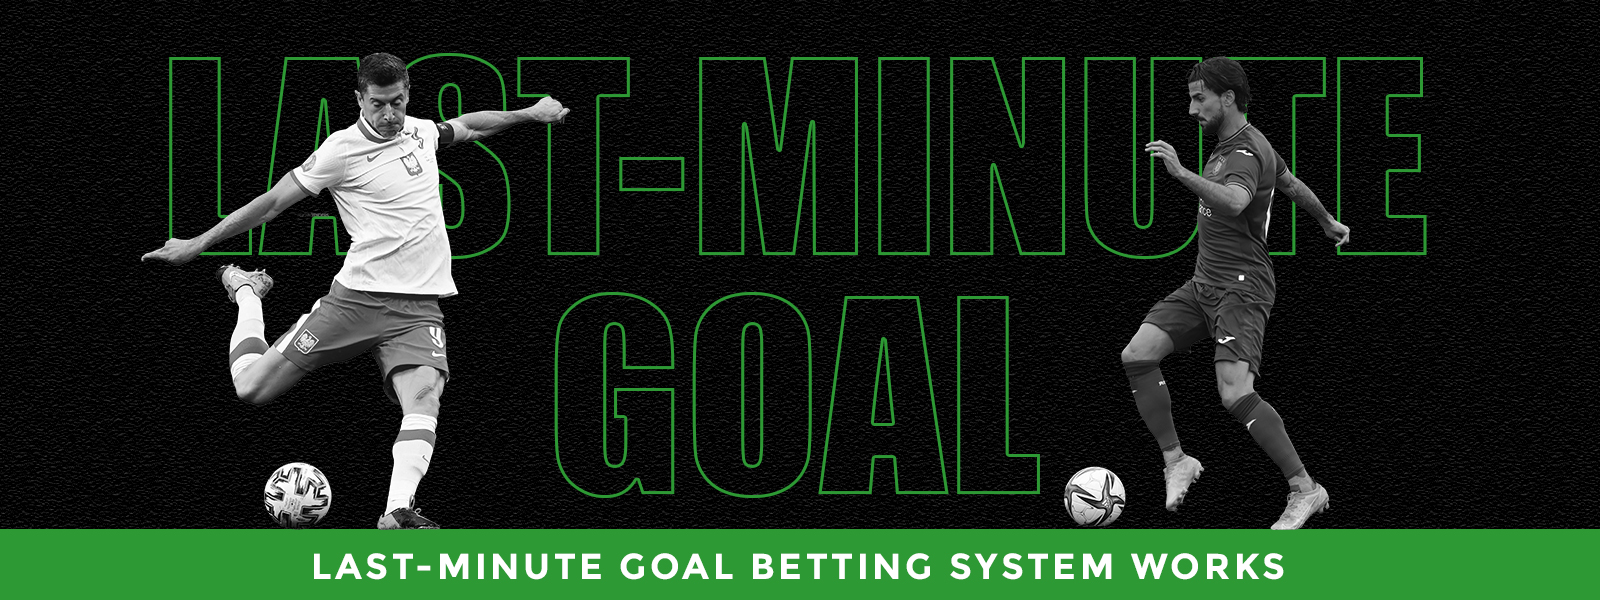 Football BTTS betting system explained